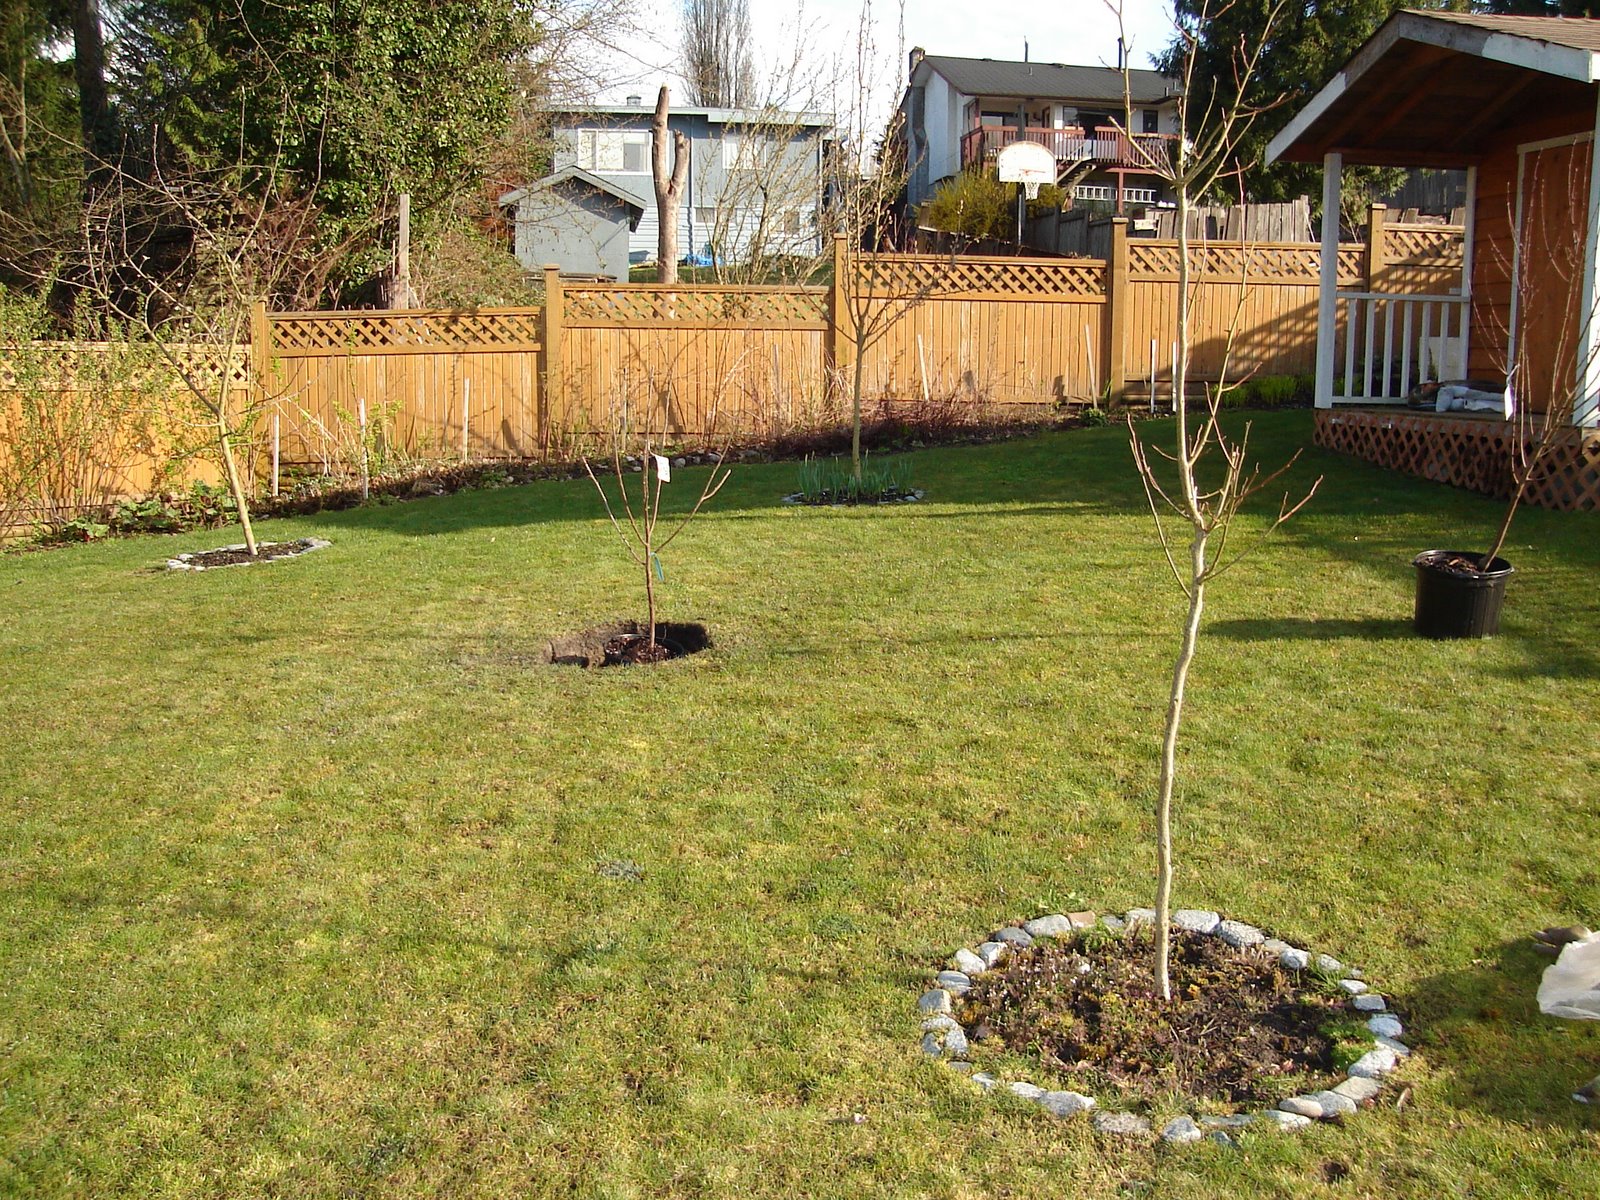 Morello cherry waiting for soil, and Frost peach nearby